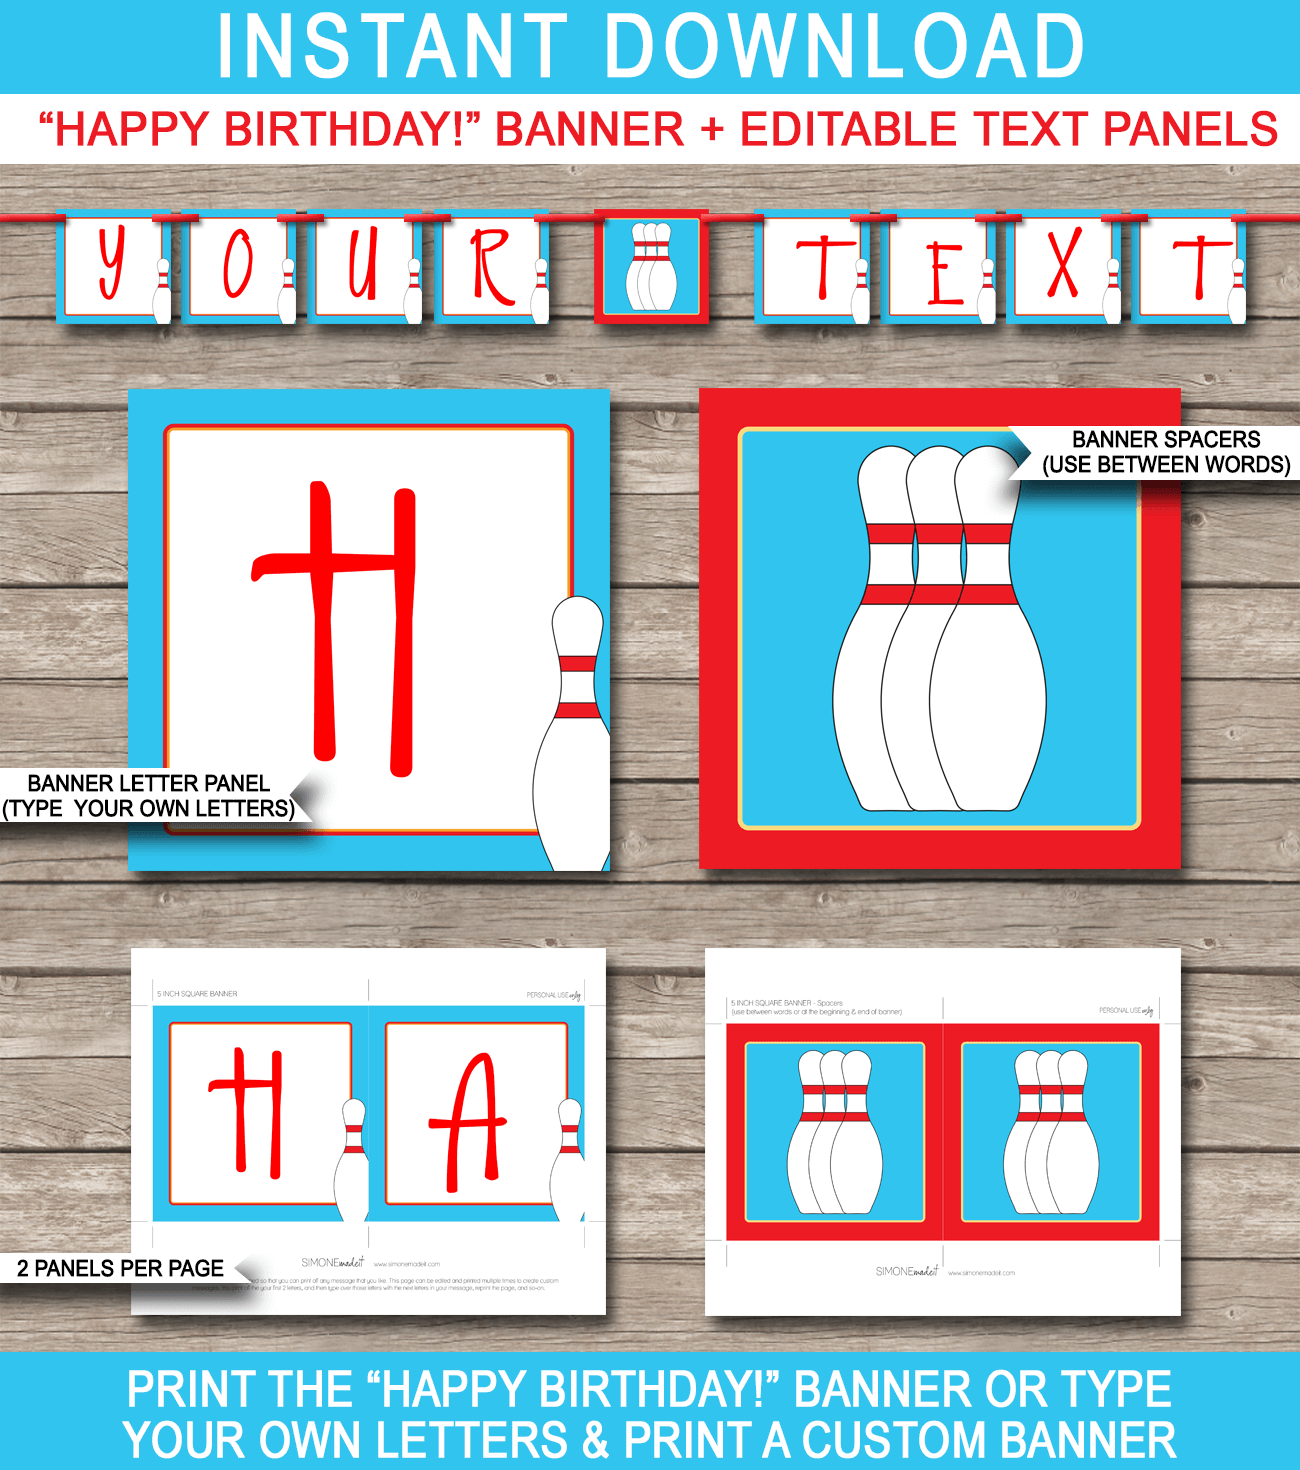 Bowling Birthday Banner Template - Bowling Bunting - Happy Birthday Banner - Birthday Party - Editable and Printable DIY Template - INSTANT DOWNLOAD $4.50 via simonemadeit.com